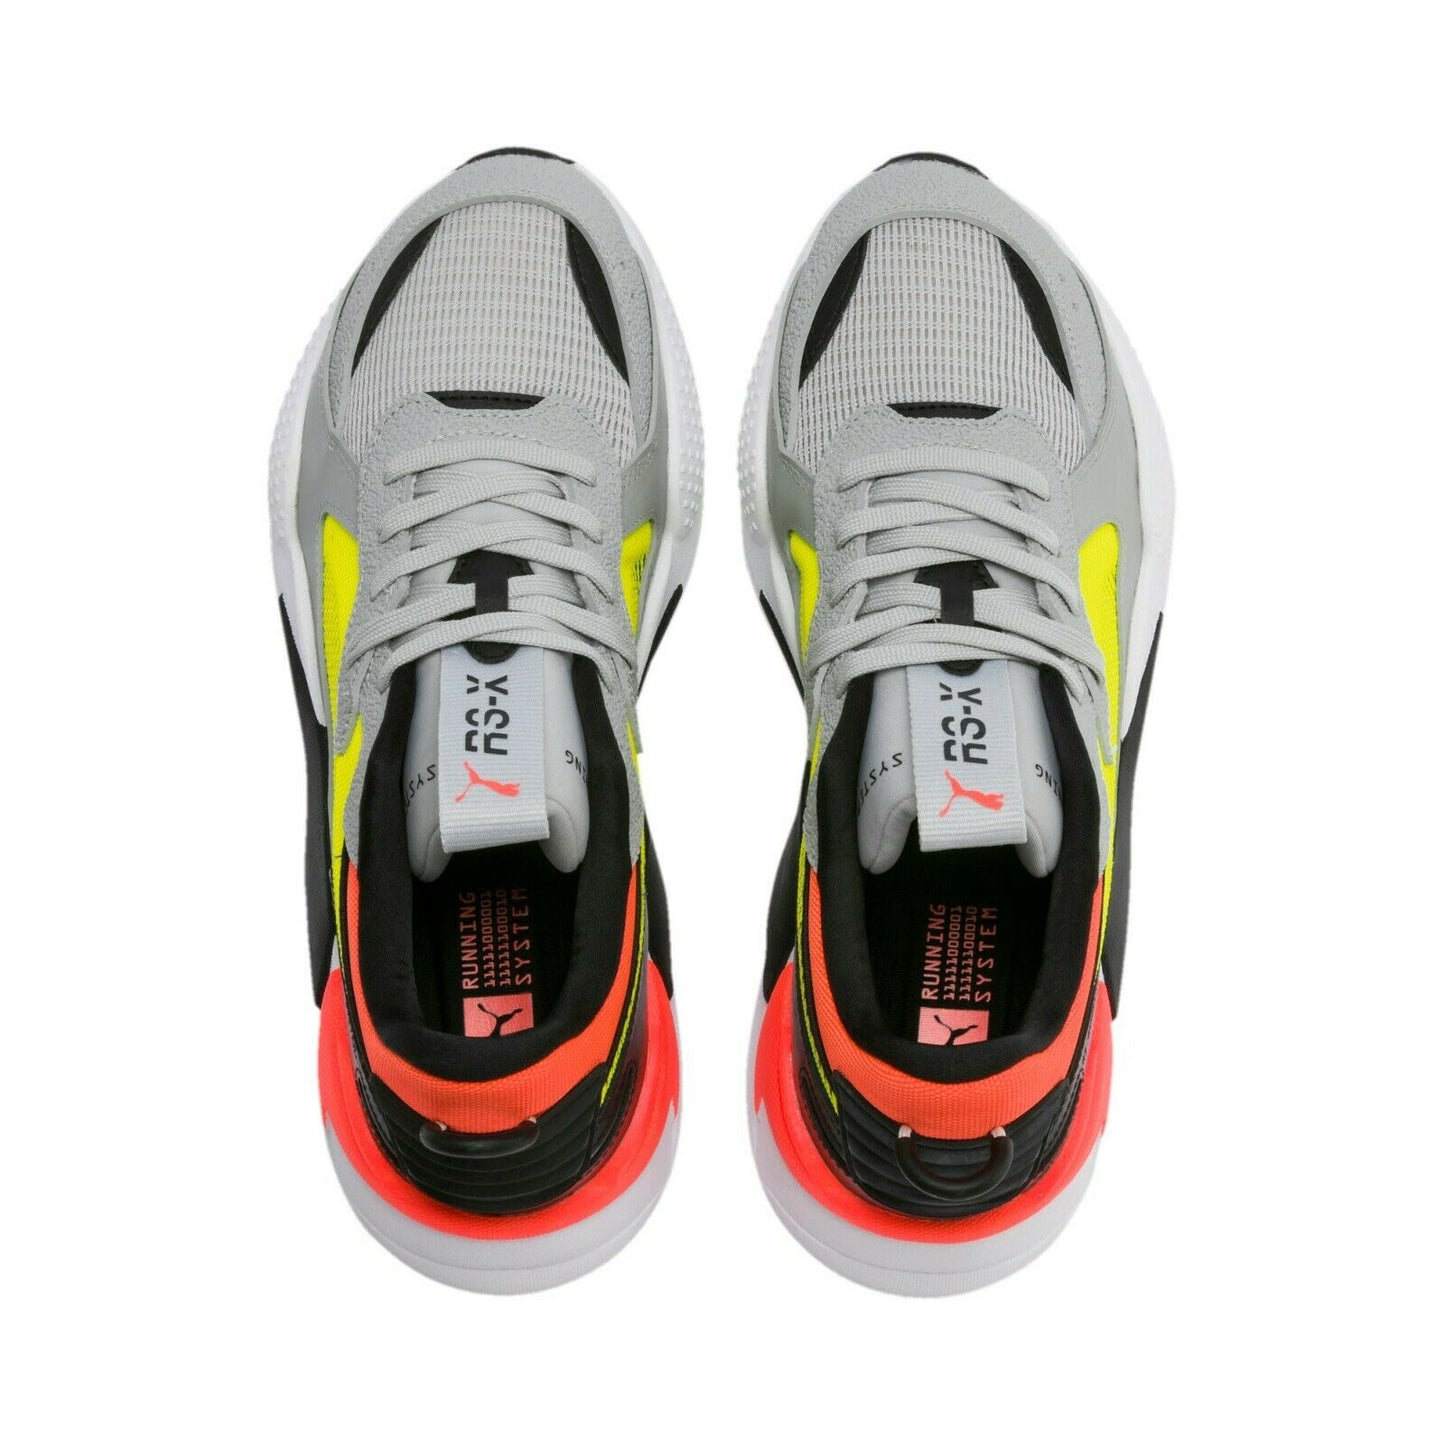 RS-X Hard Drive High Rise/Yellow Alert Sneakers Running Shoes -36981801